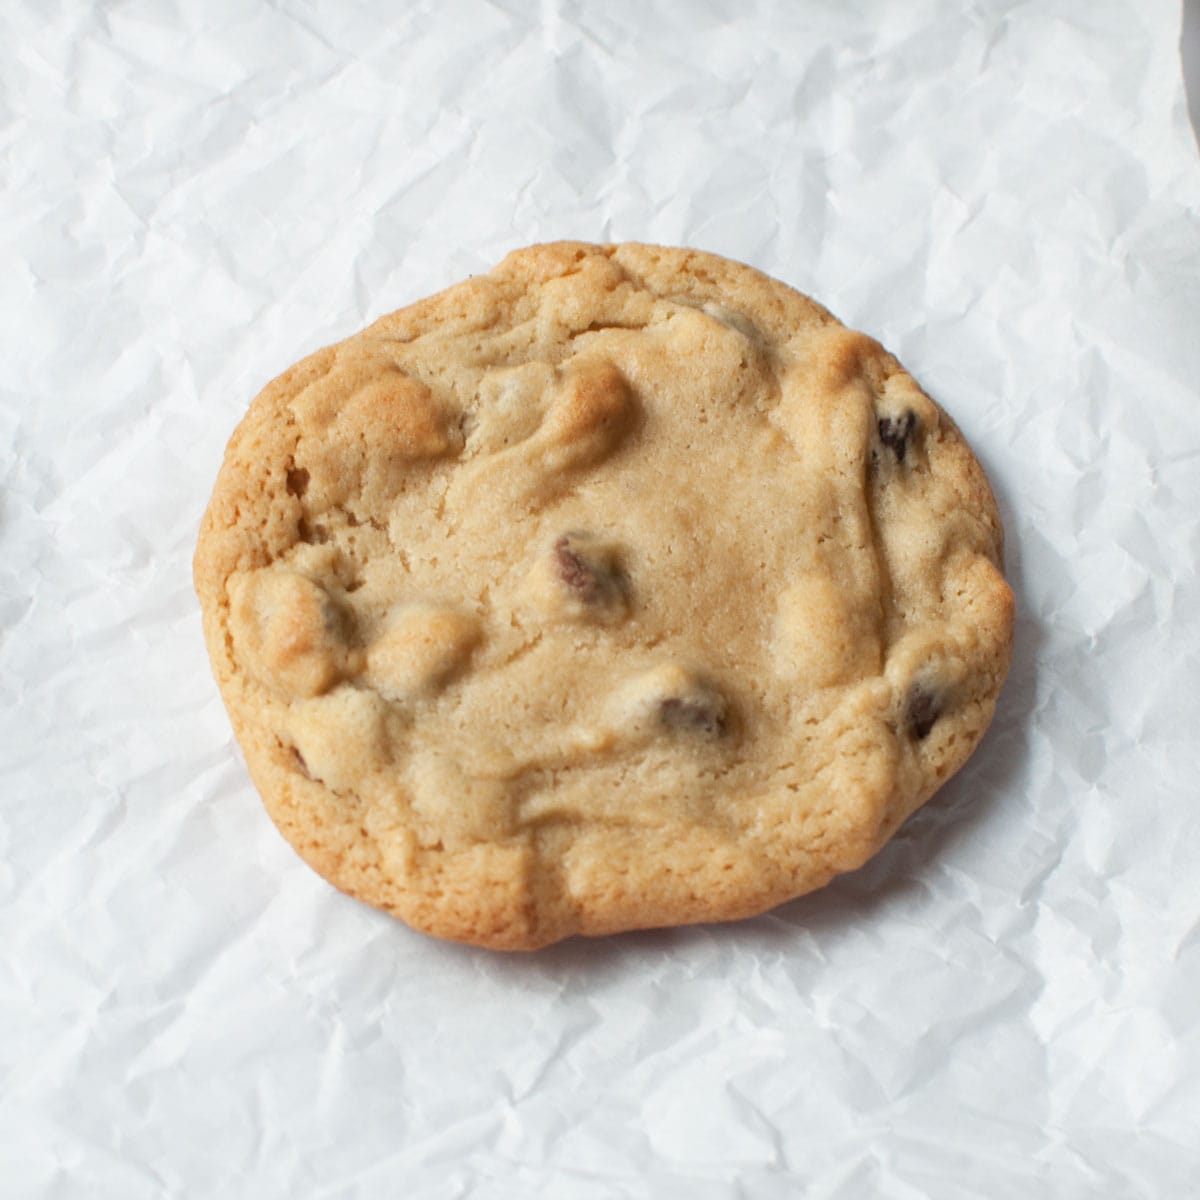 A chocolate chip cookie on a white background.